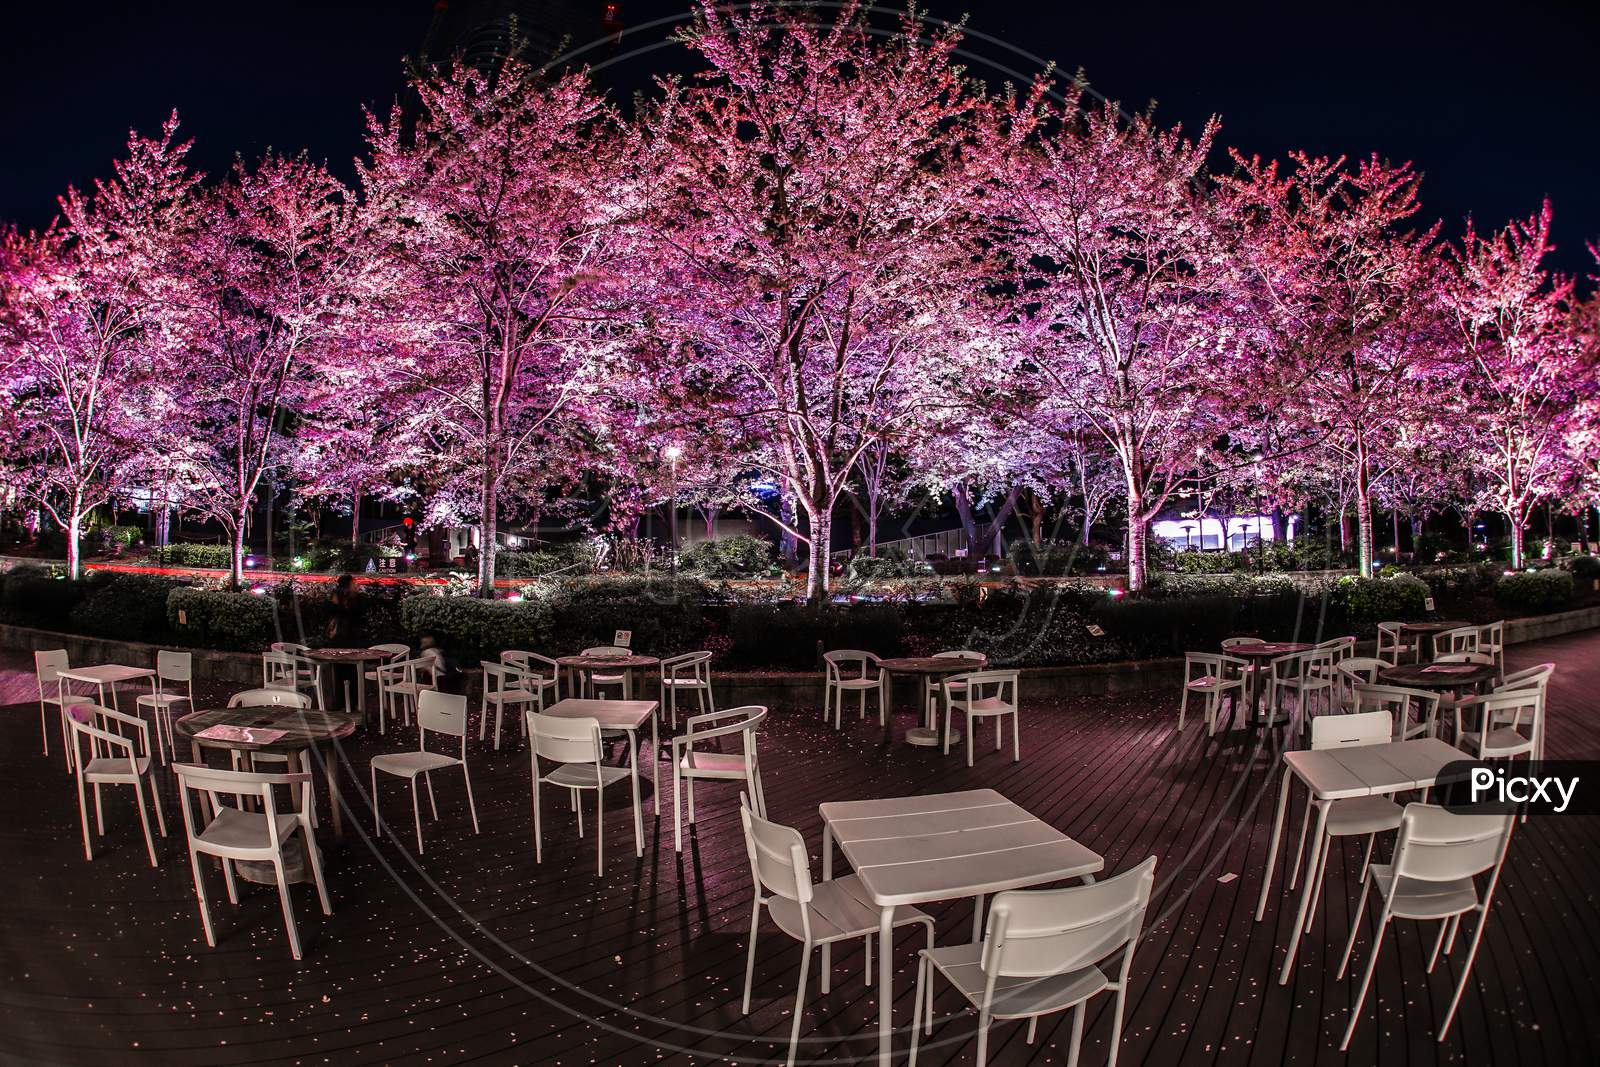 Full Bloom Of The Cherry Tree And The Tokyo Midtown